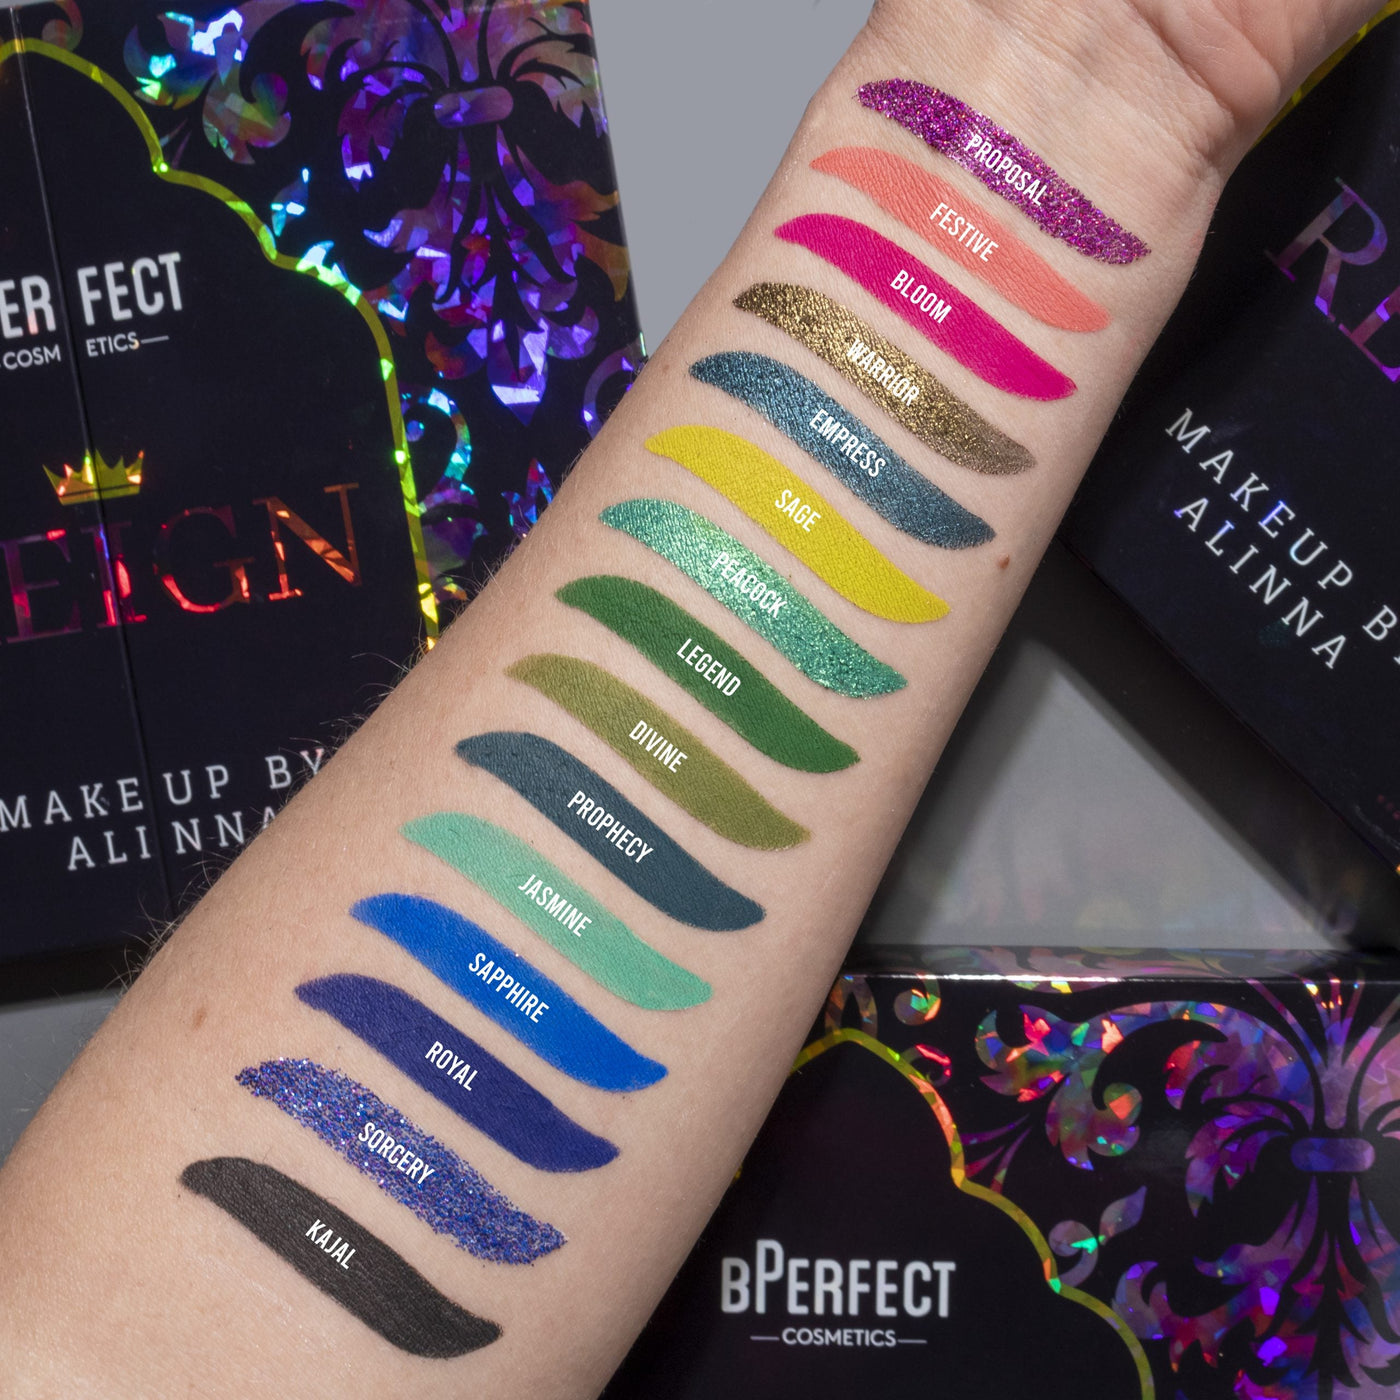 BPerfect x Makeup by Alinna - The Collection